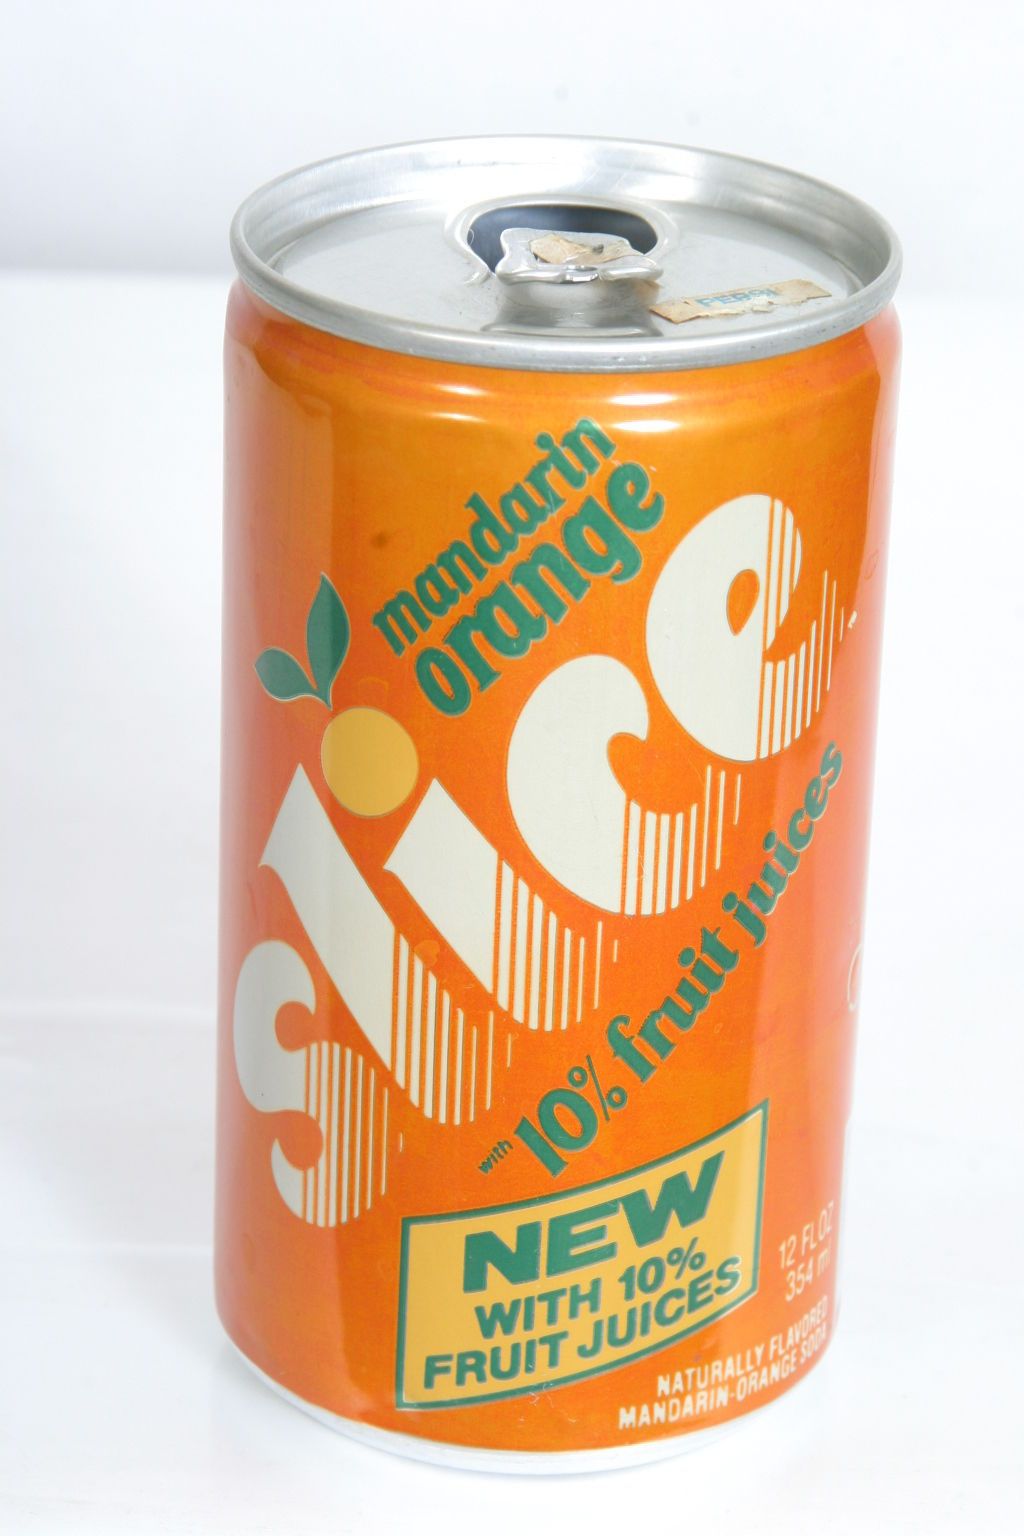 This taste that will never be reproduced but crush or any other orange beverage